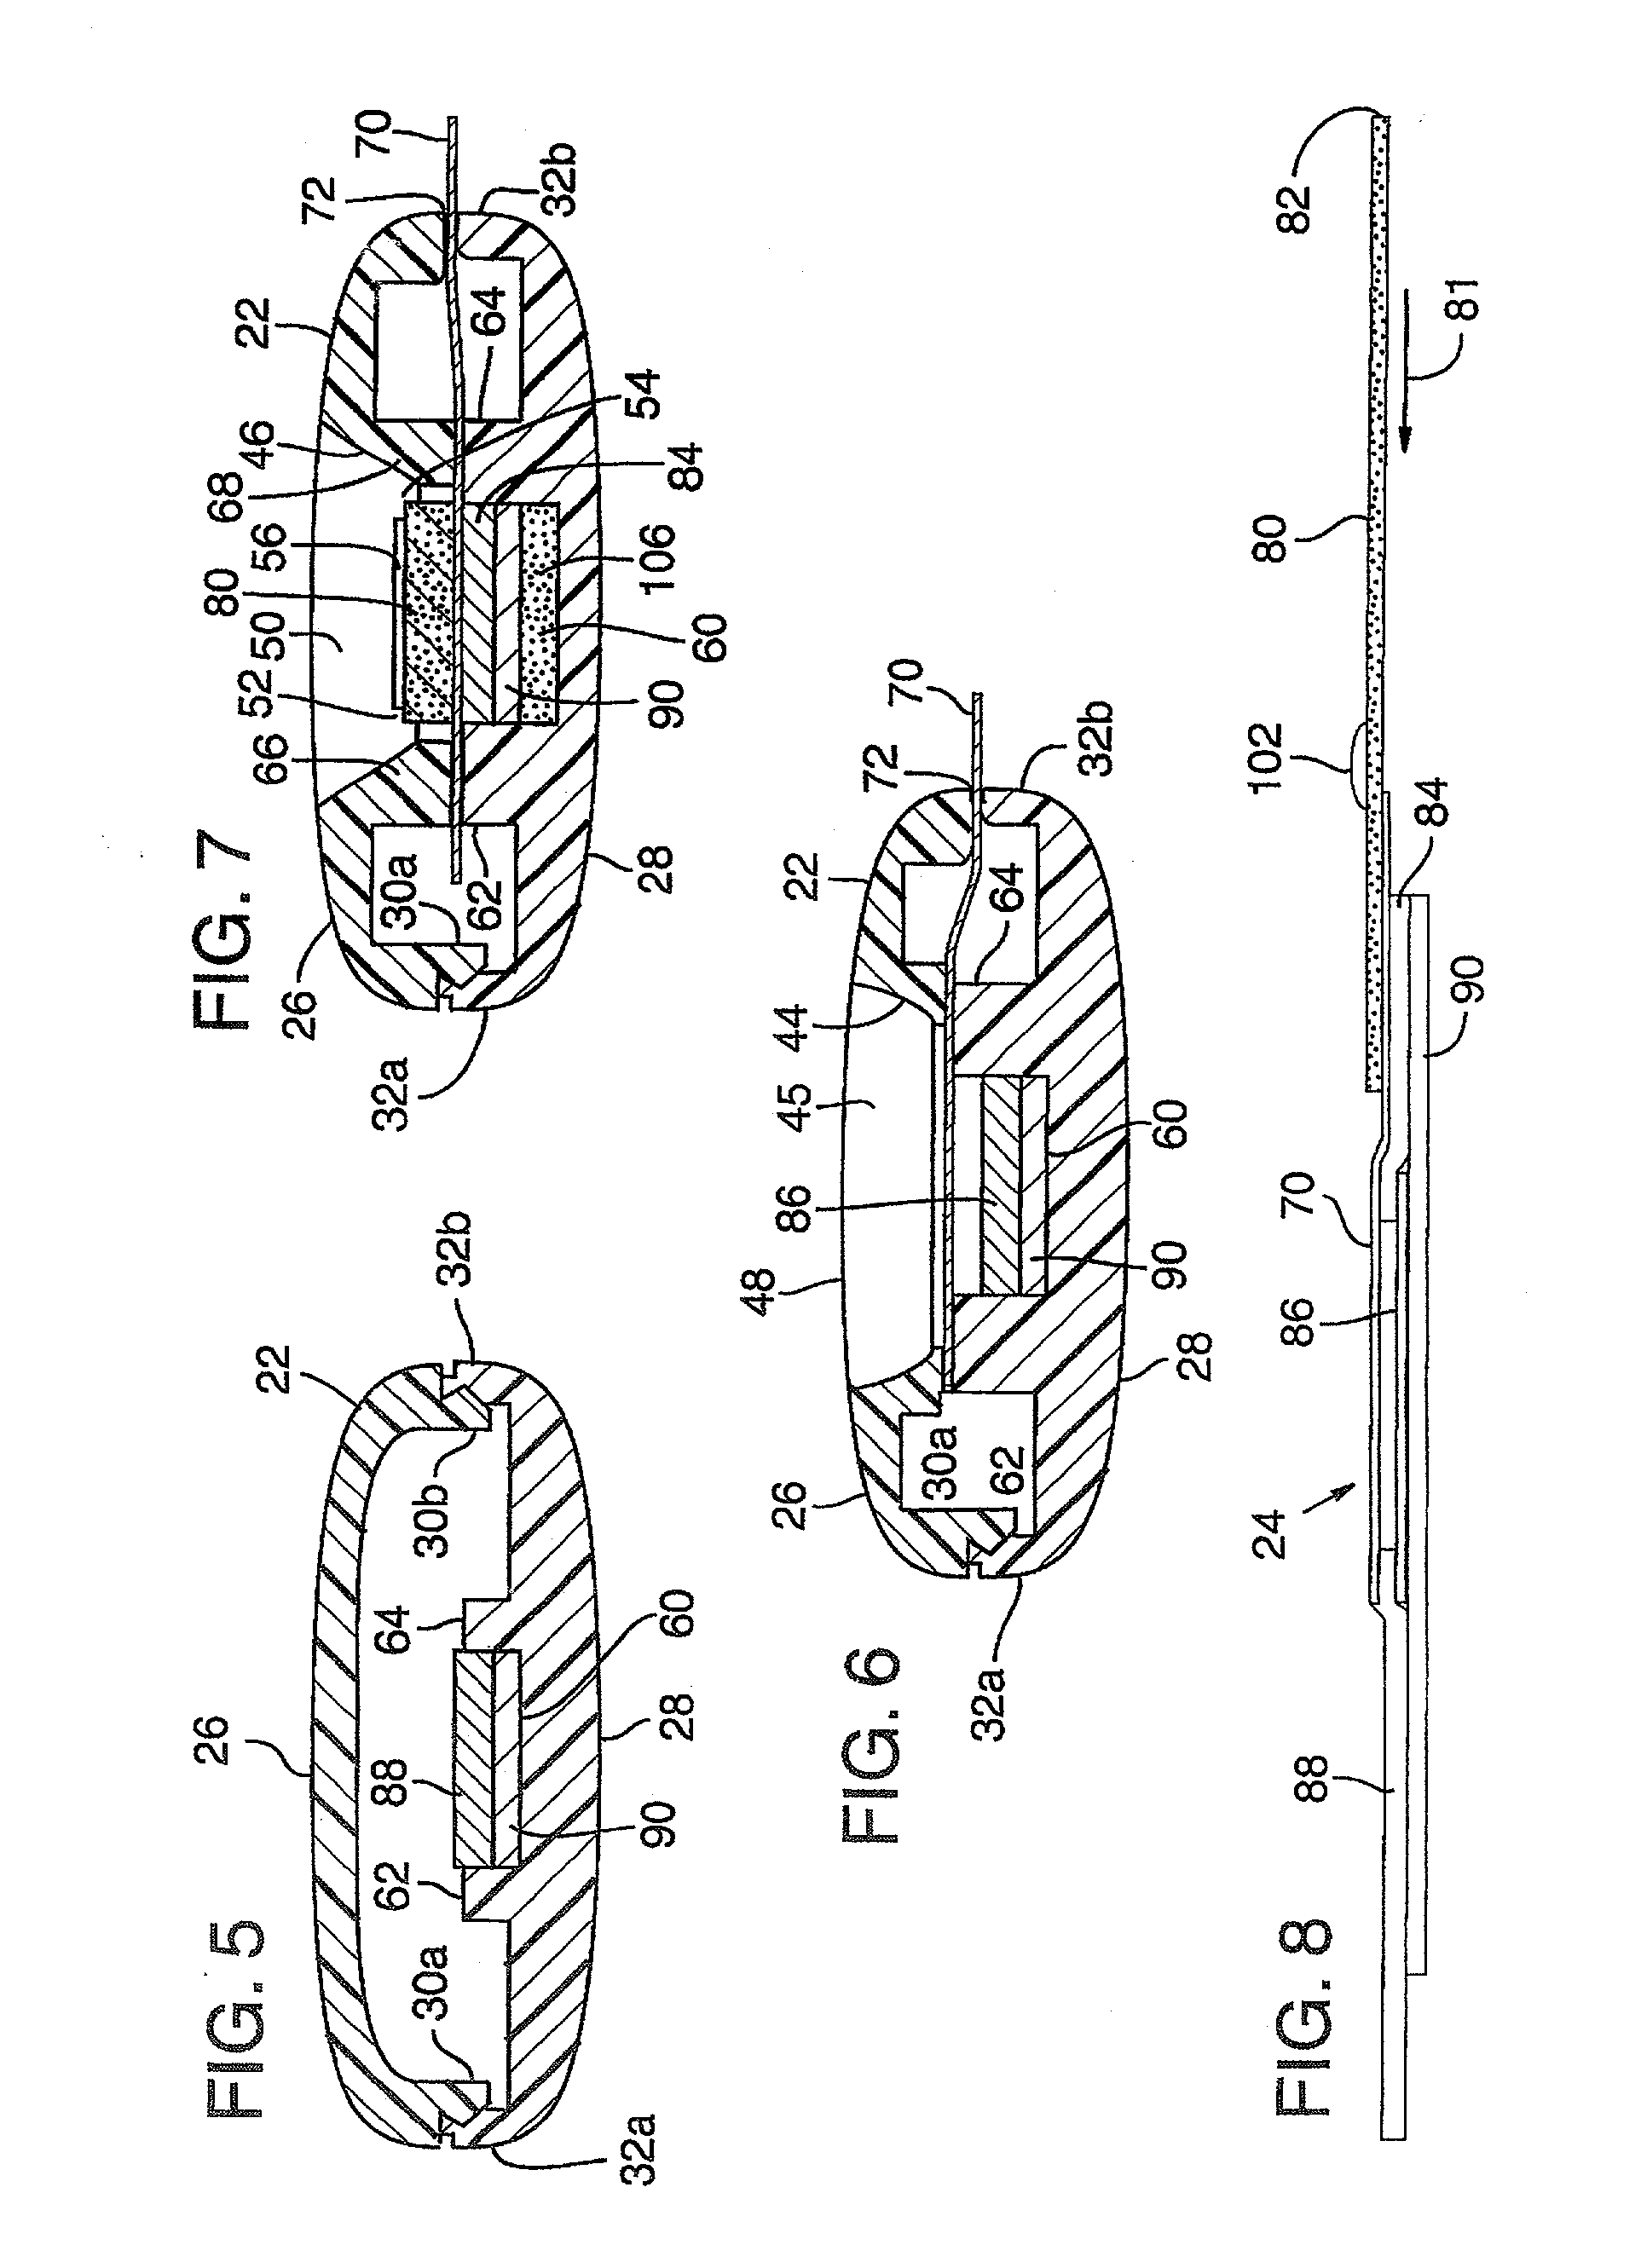 Collection device for lateral flow chromatography